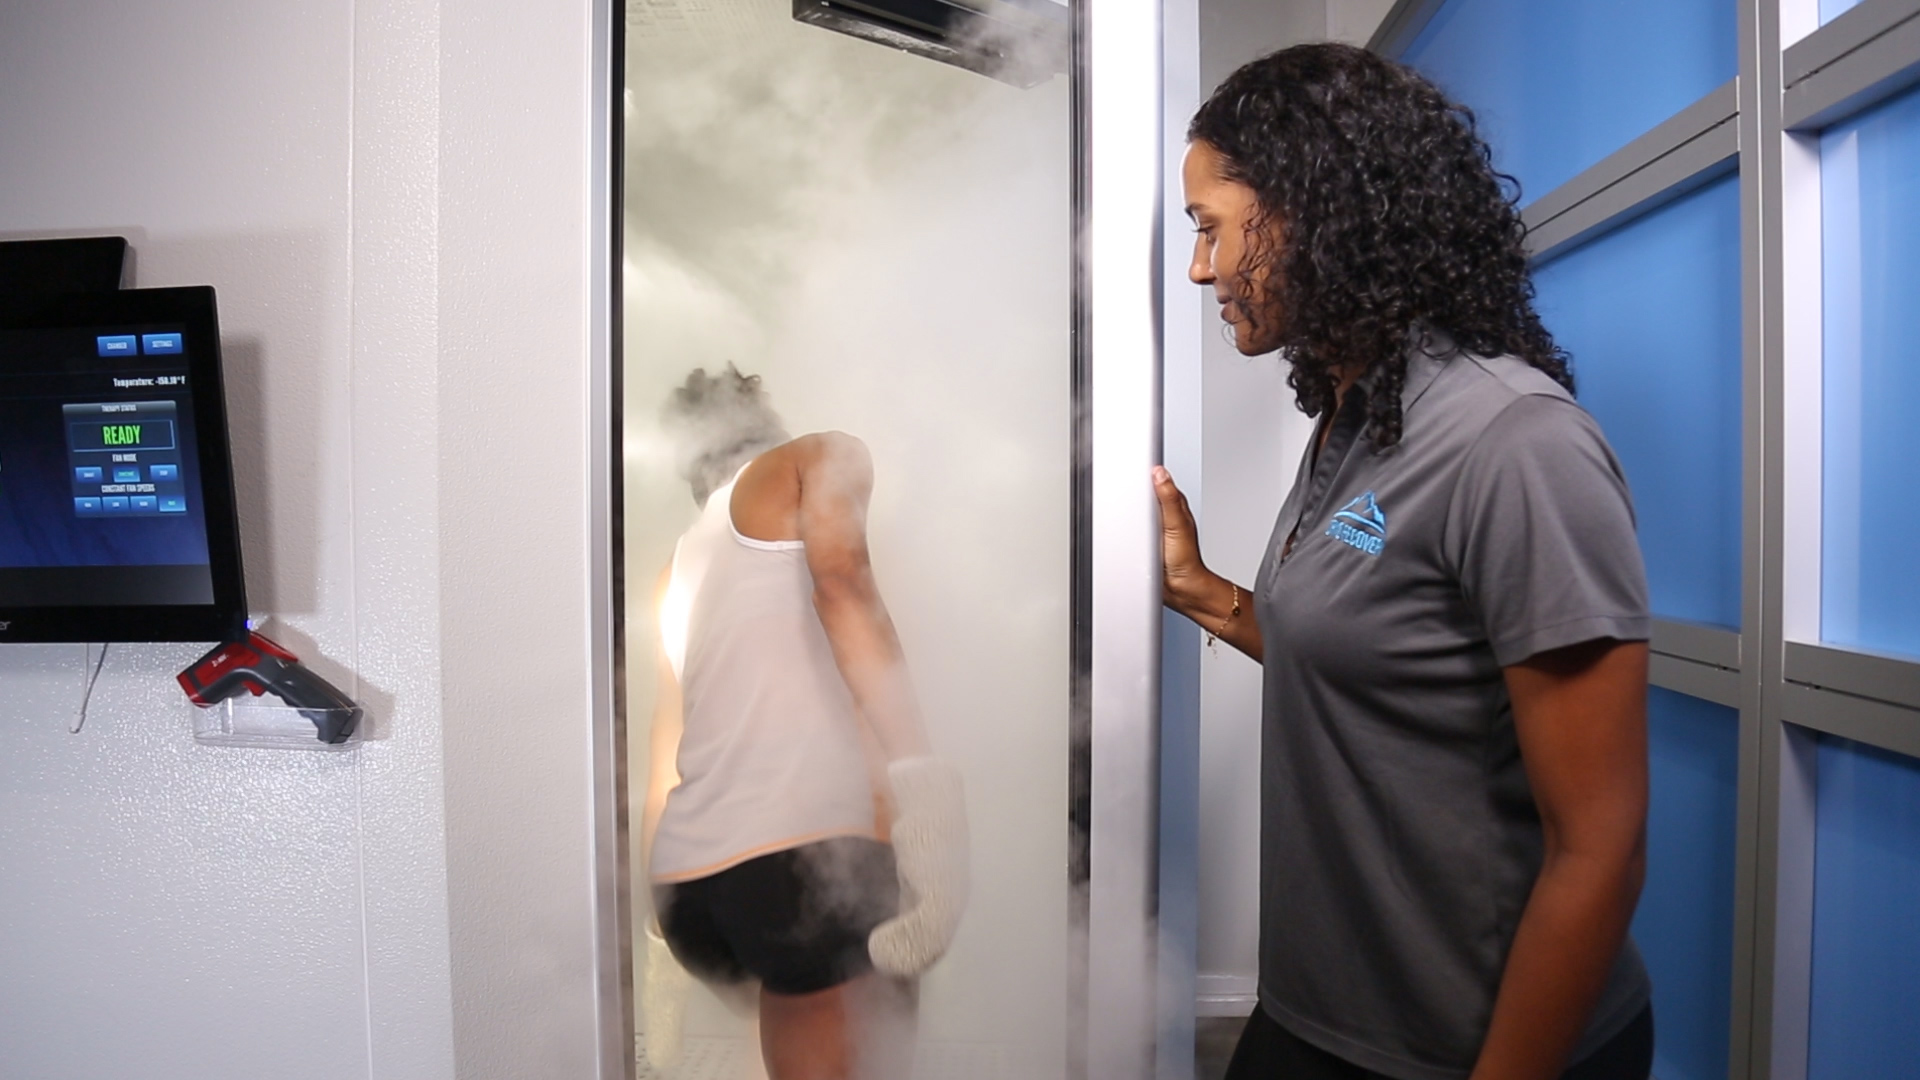 In cryo chamber patient is totally in the cold zone